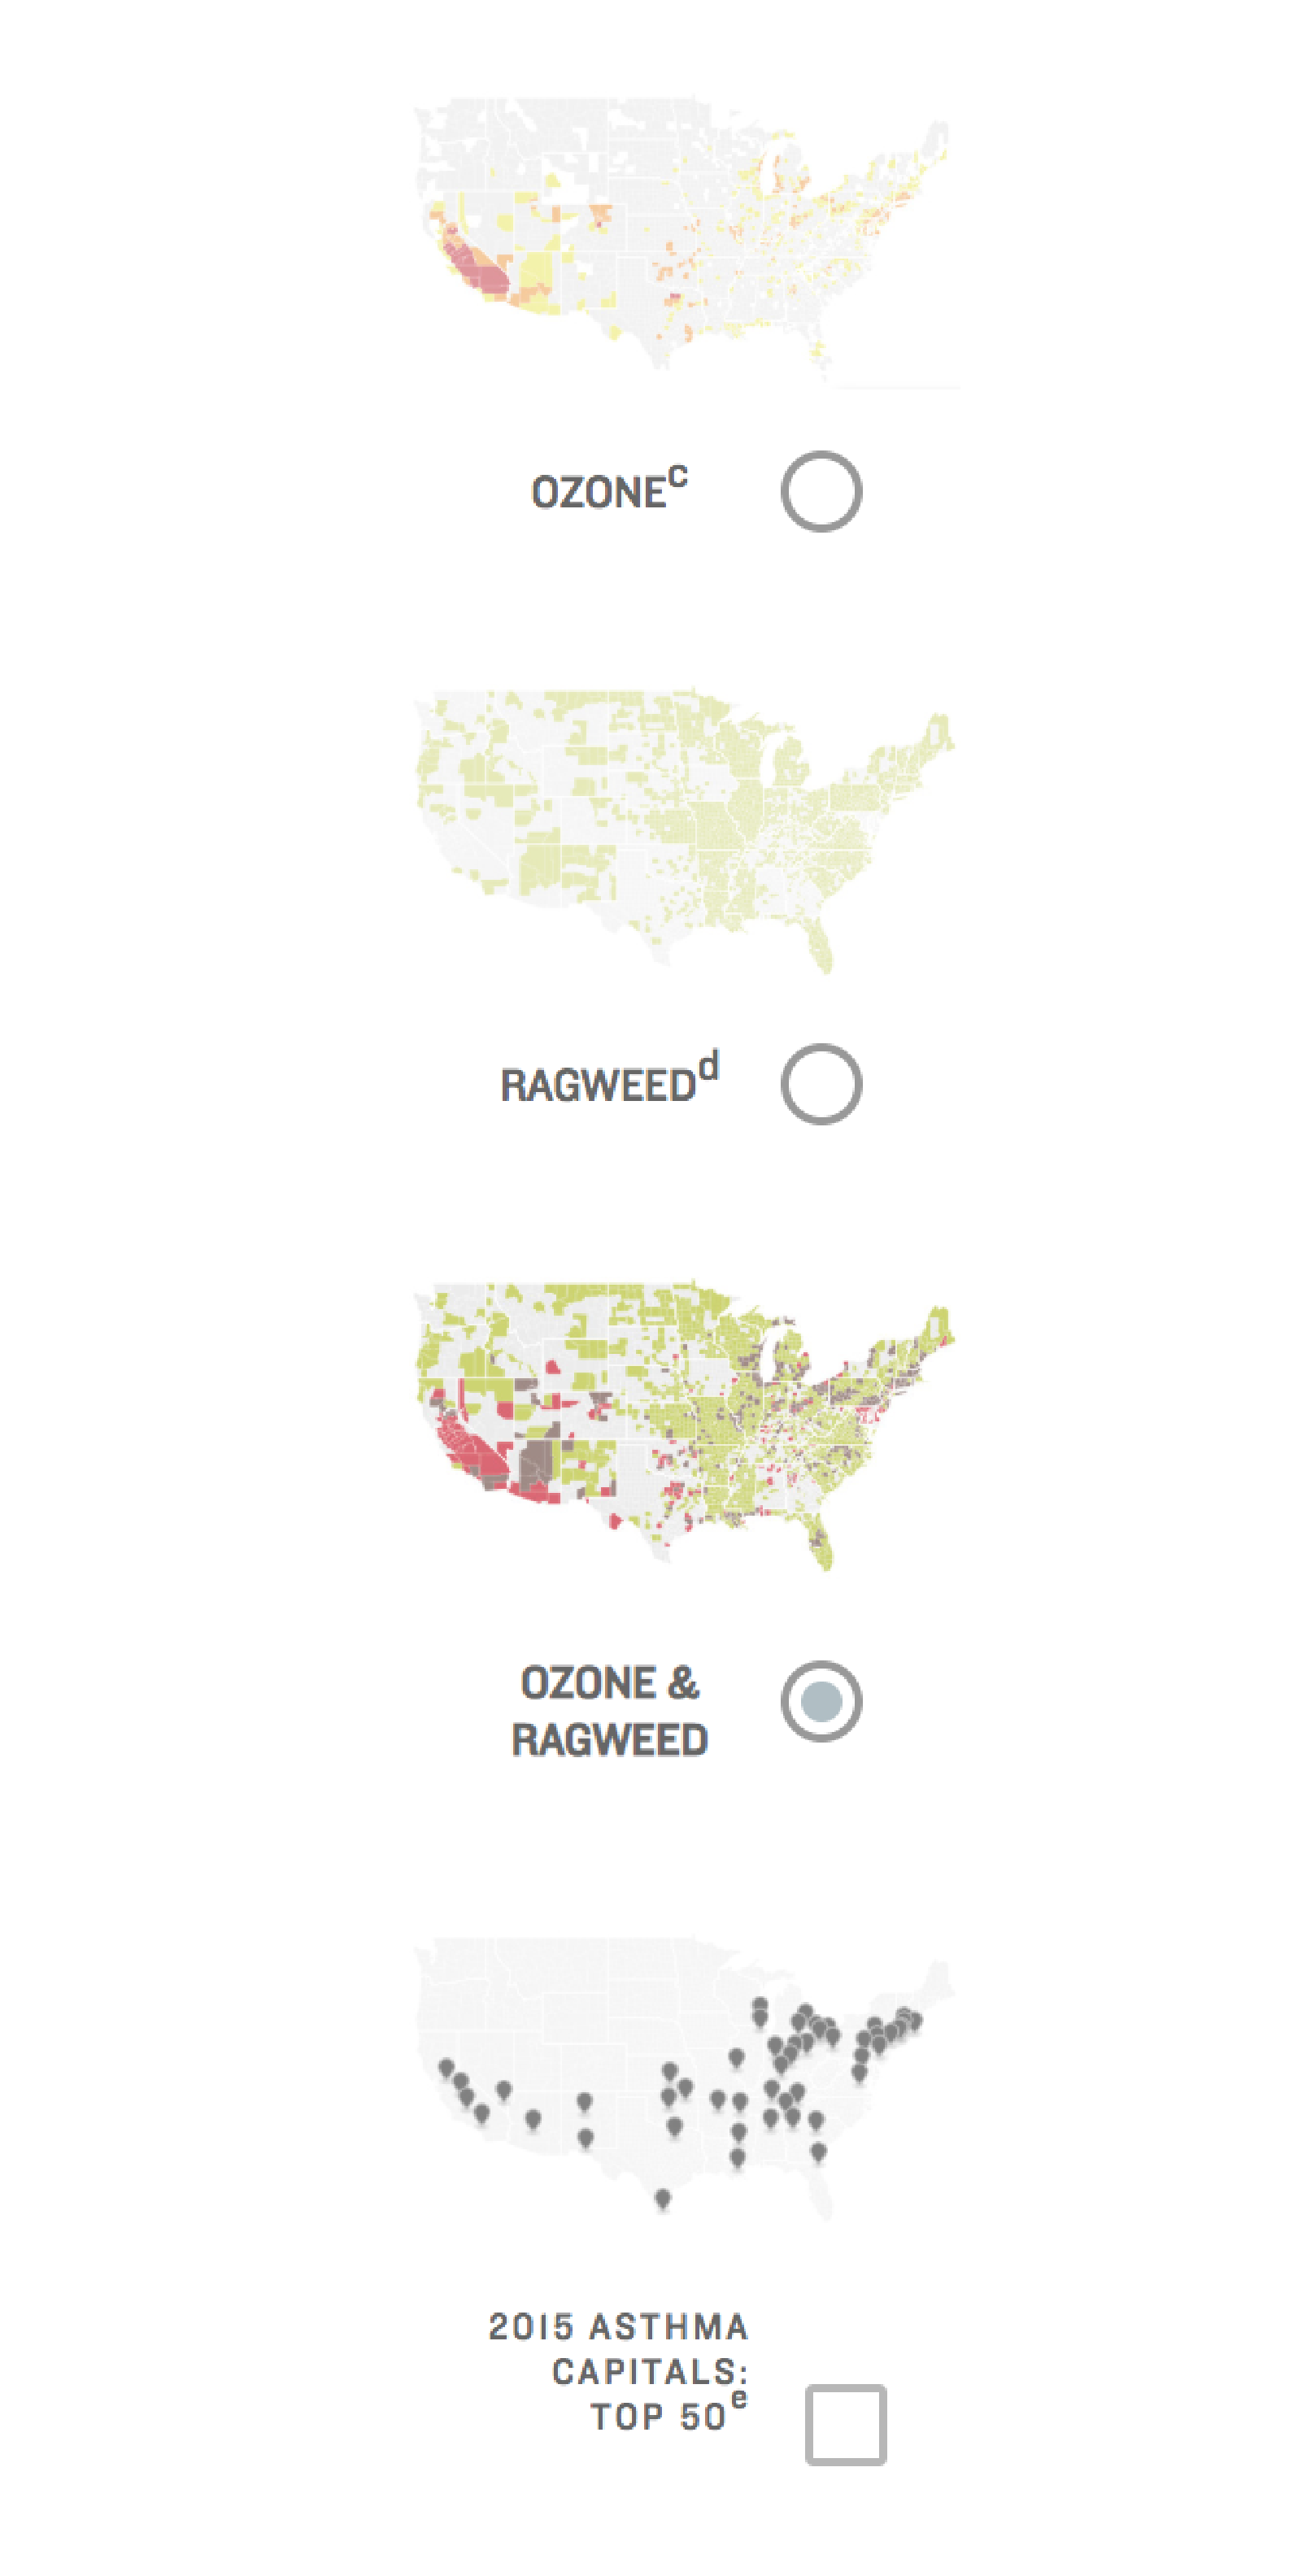 Maps of the United states Ozone and Ragweed levels, and top 50 asthma capitals from 2015